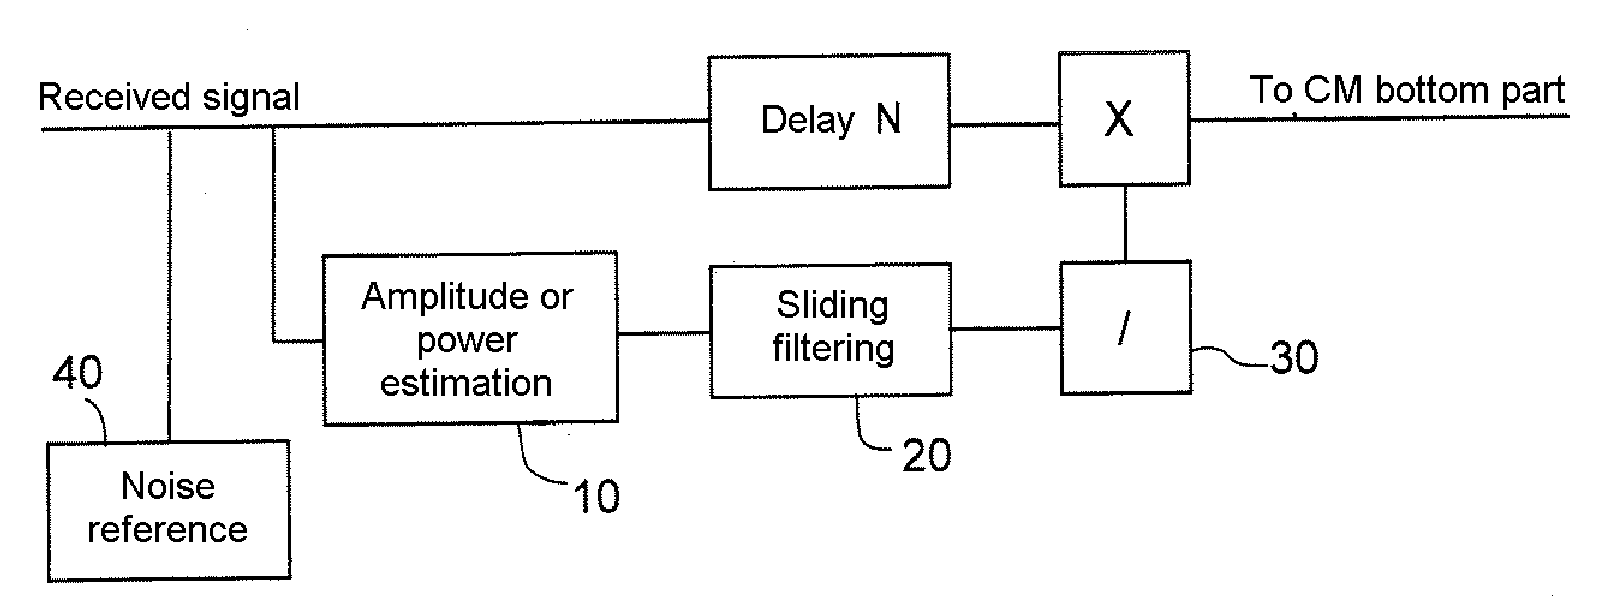 Processing of interference on a radiofrequency signal by power inversion